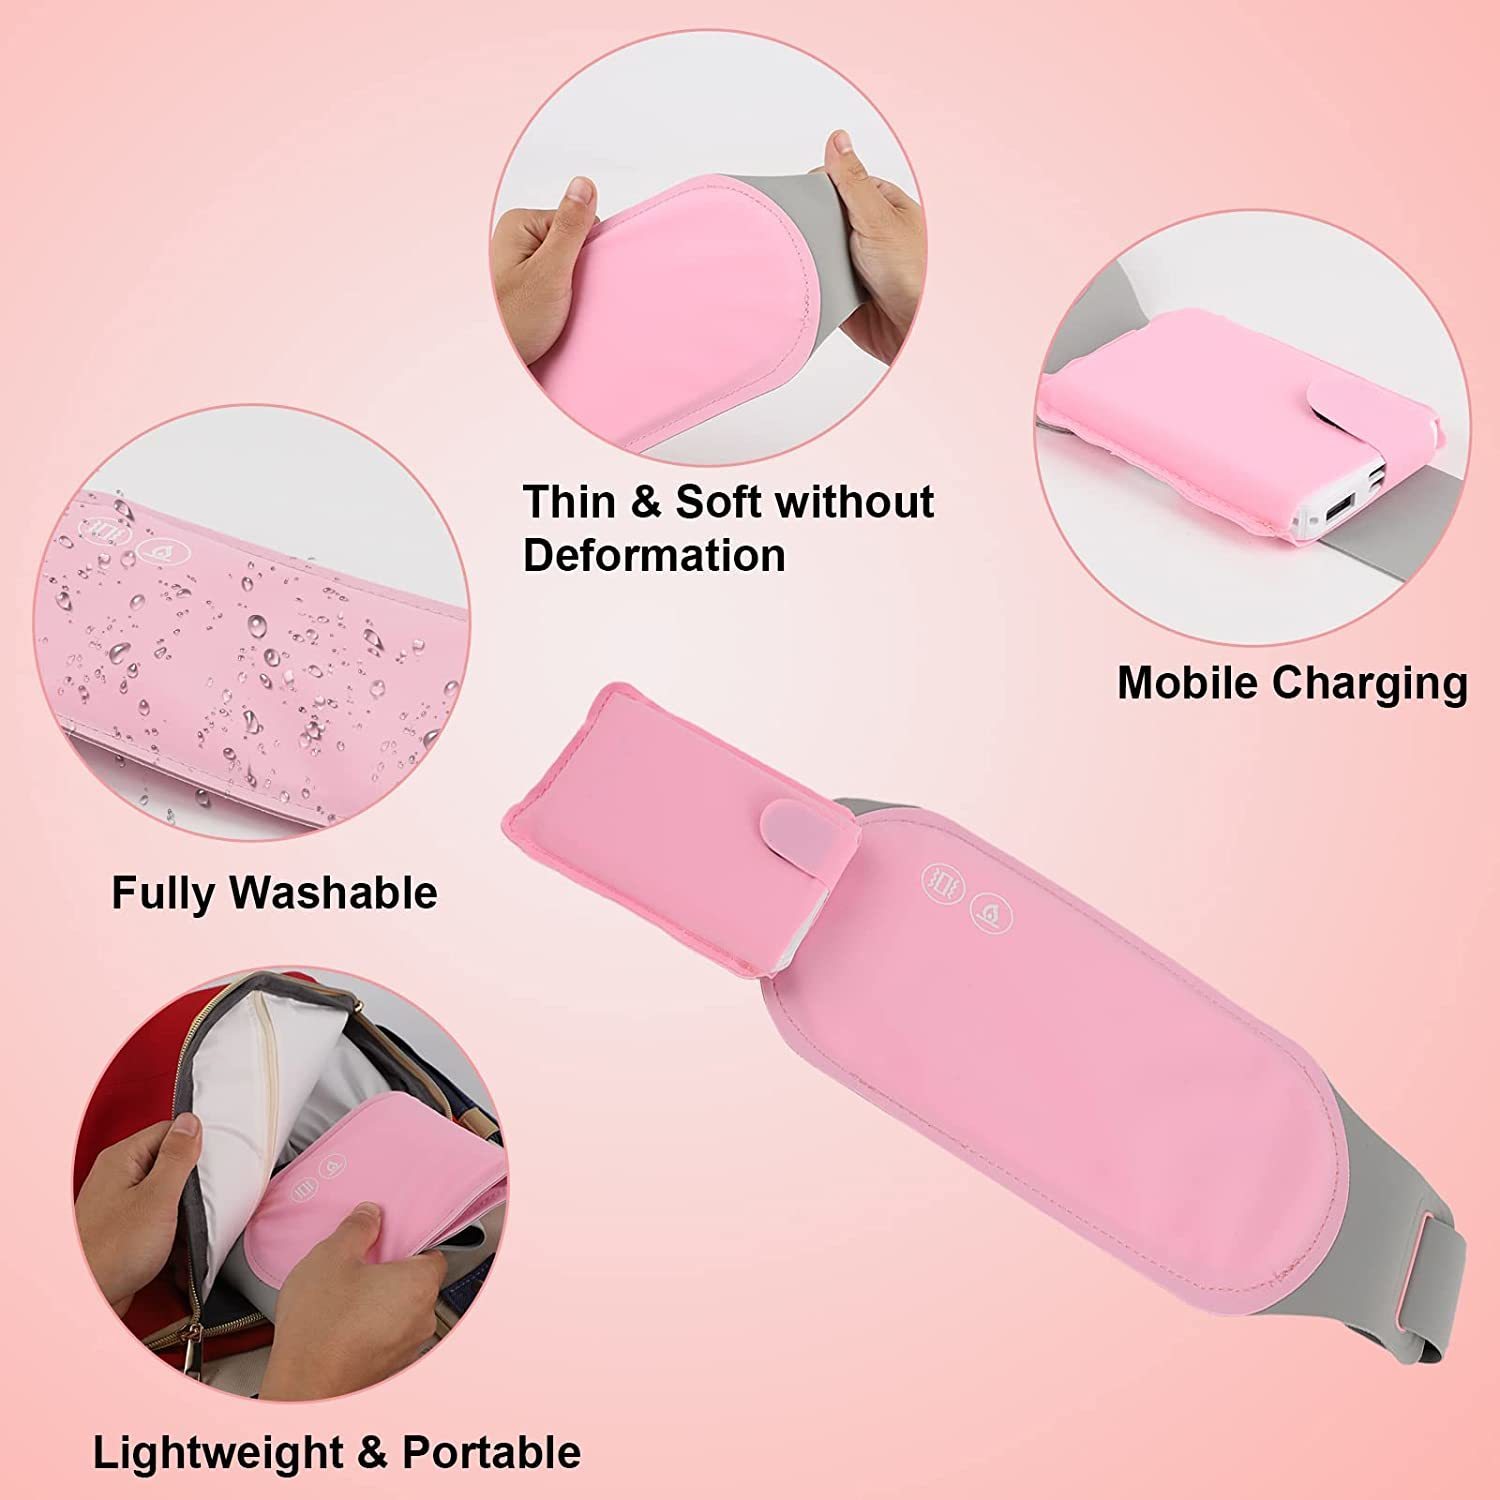 Portable Slim Equipment Washable Menstrual Colica Massager Colic Period Pain Relief Heating Pad for Cramps Abdominal Belly Warmer 1340645